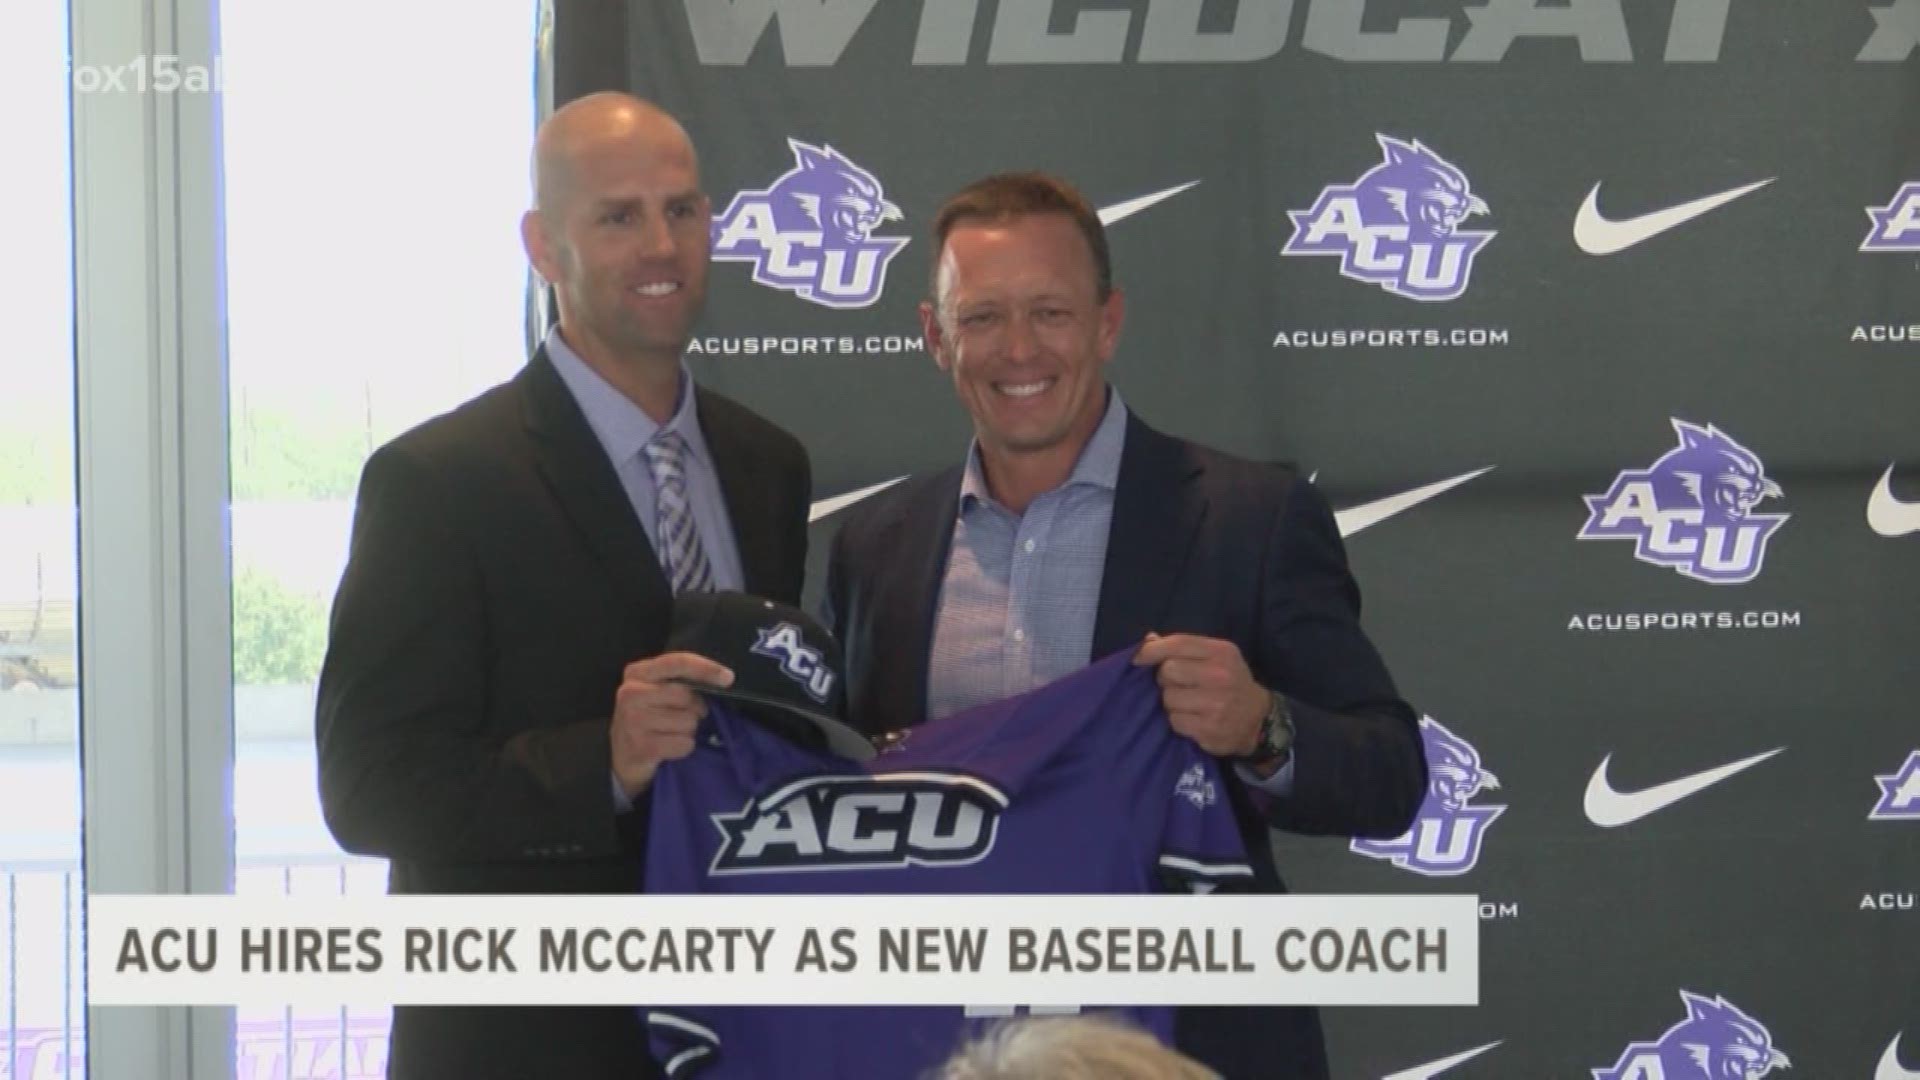 Wildcats hire former Dallas Baptist coach Rick McCarty as the program's fourth ever baseball coach. McCarty previously served as the pitching coach at DBU for the past 3 years.